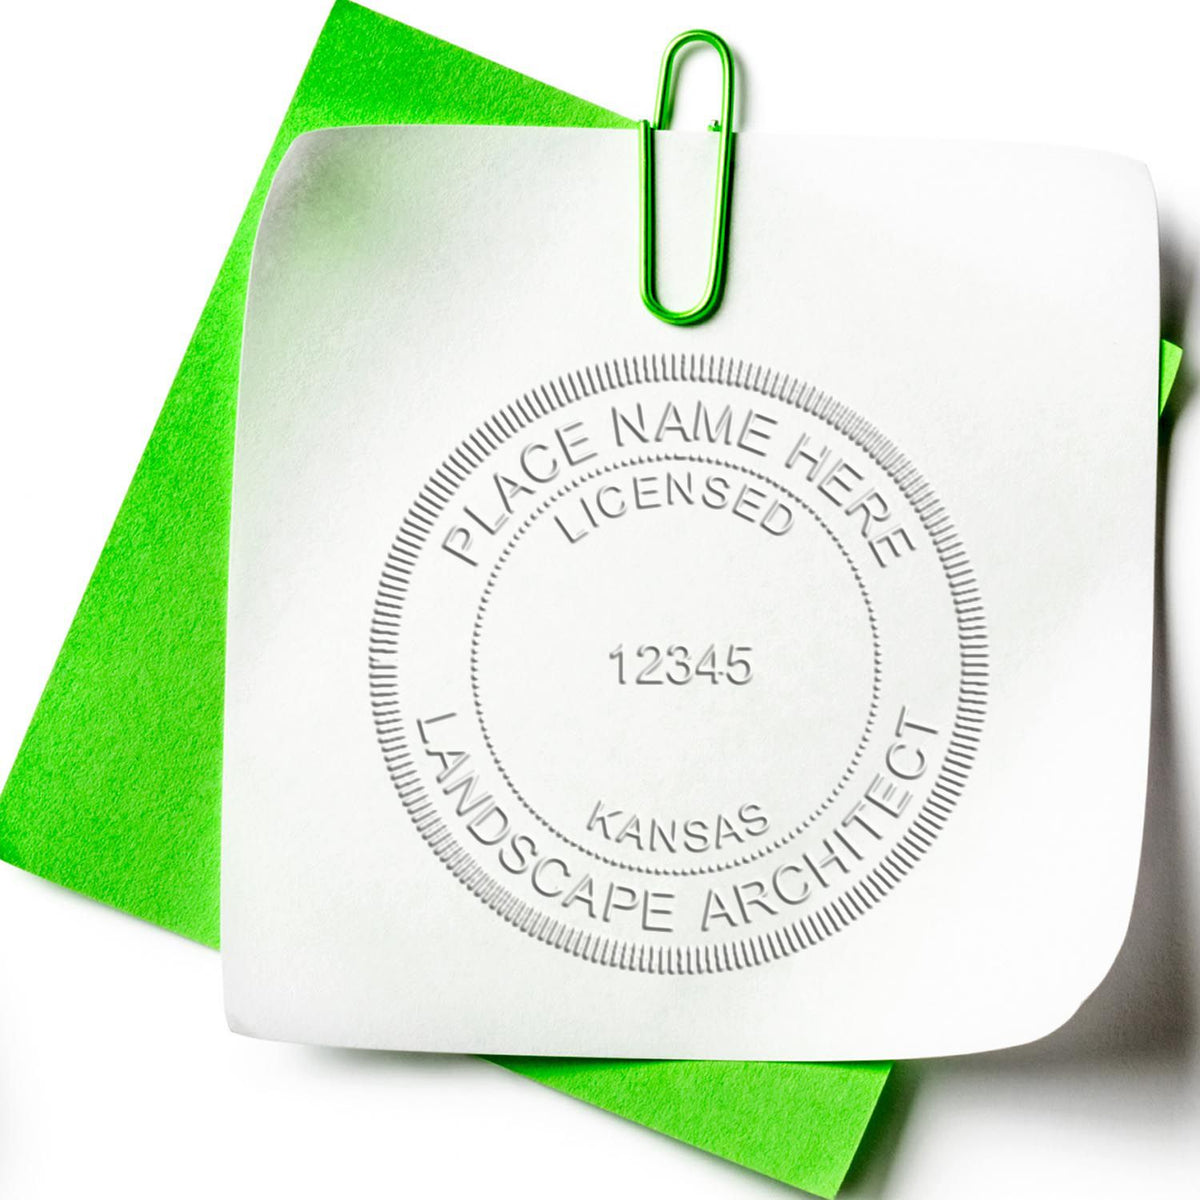 A stamped imprint of the Gift Kansas Landscape Architect Seal in this stylish lifestyle photo, setting the tone for a unique and personalized product.